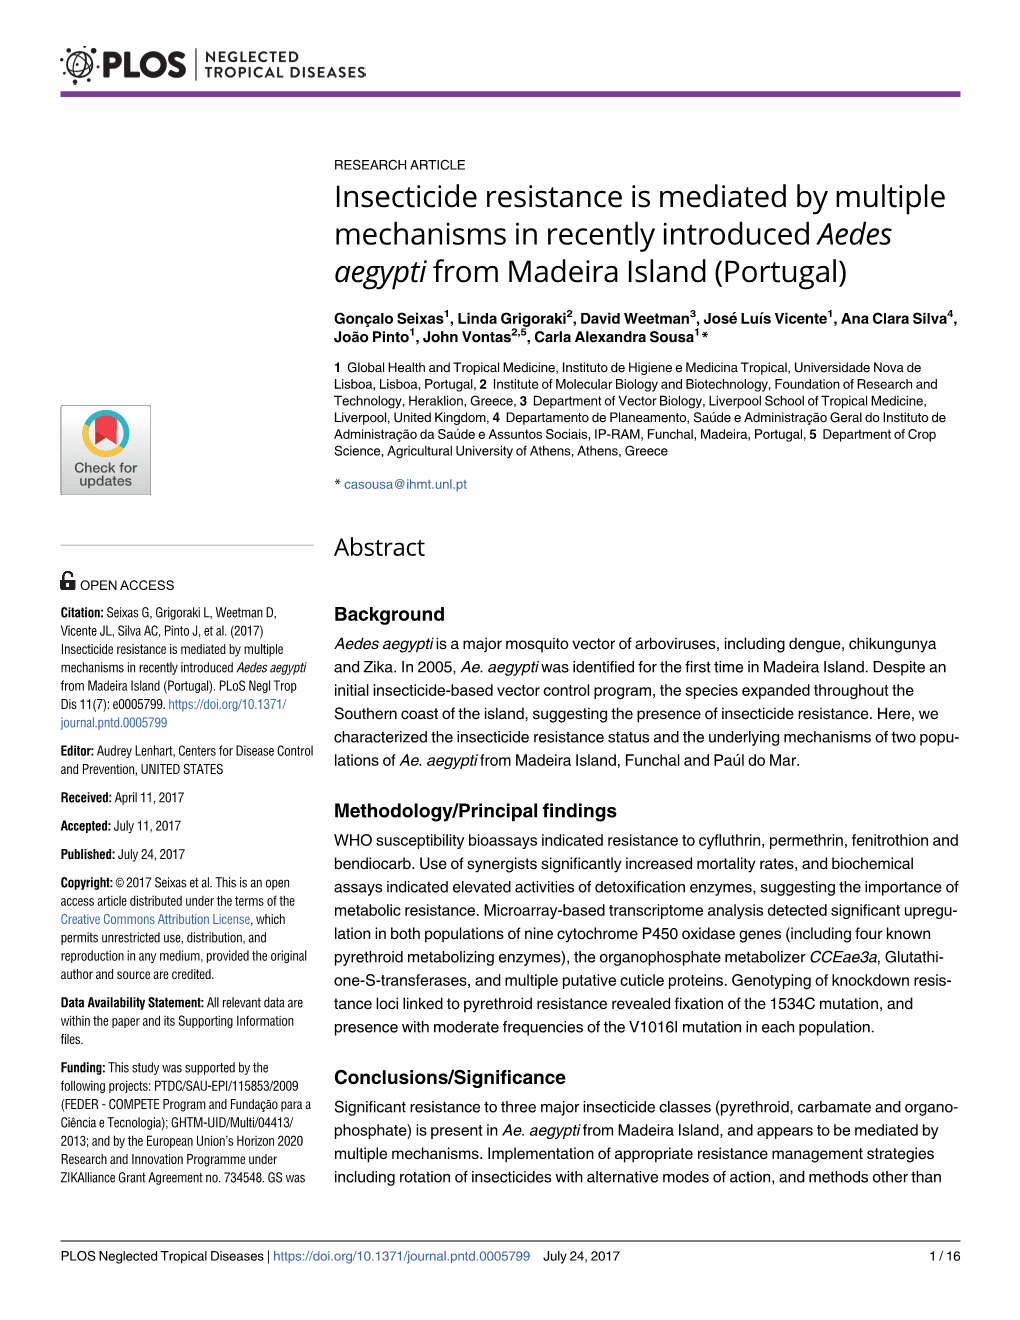 Insecticide Resistance Is Mediated by Multiple Mechanisms in Recently Introduced Aedes Aegypti from Madeira Island (Portugal)